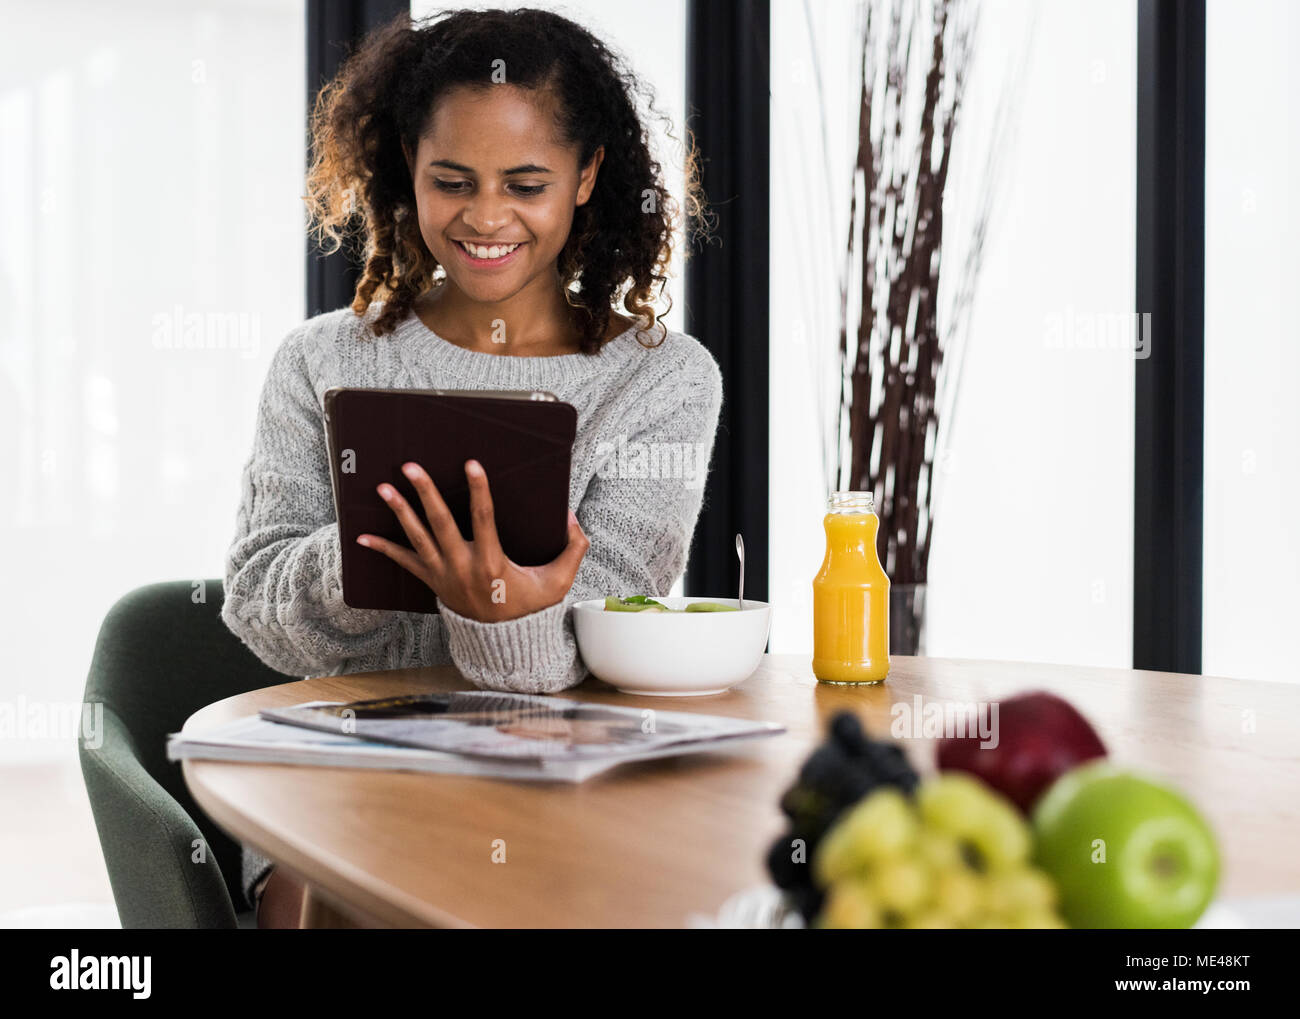 Healthy lifestyle woman using a tablet Stock Photo